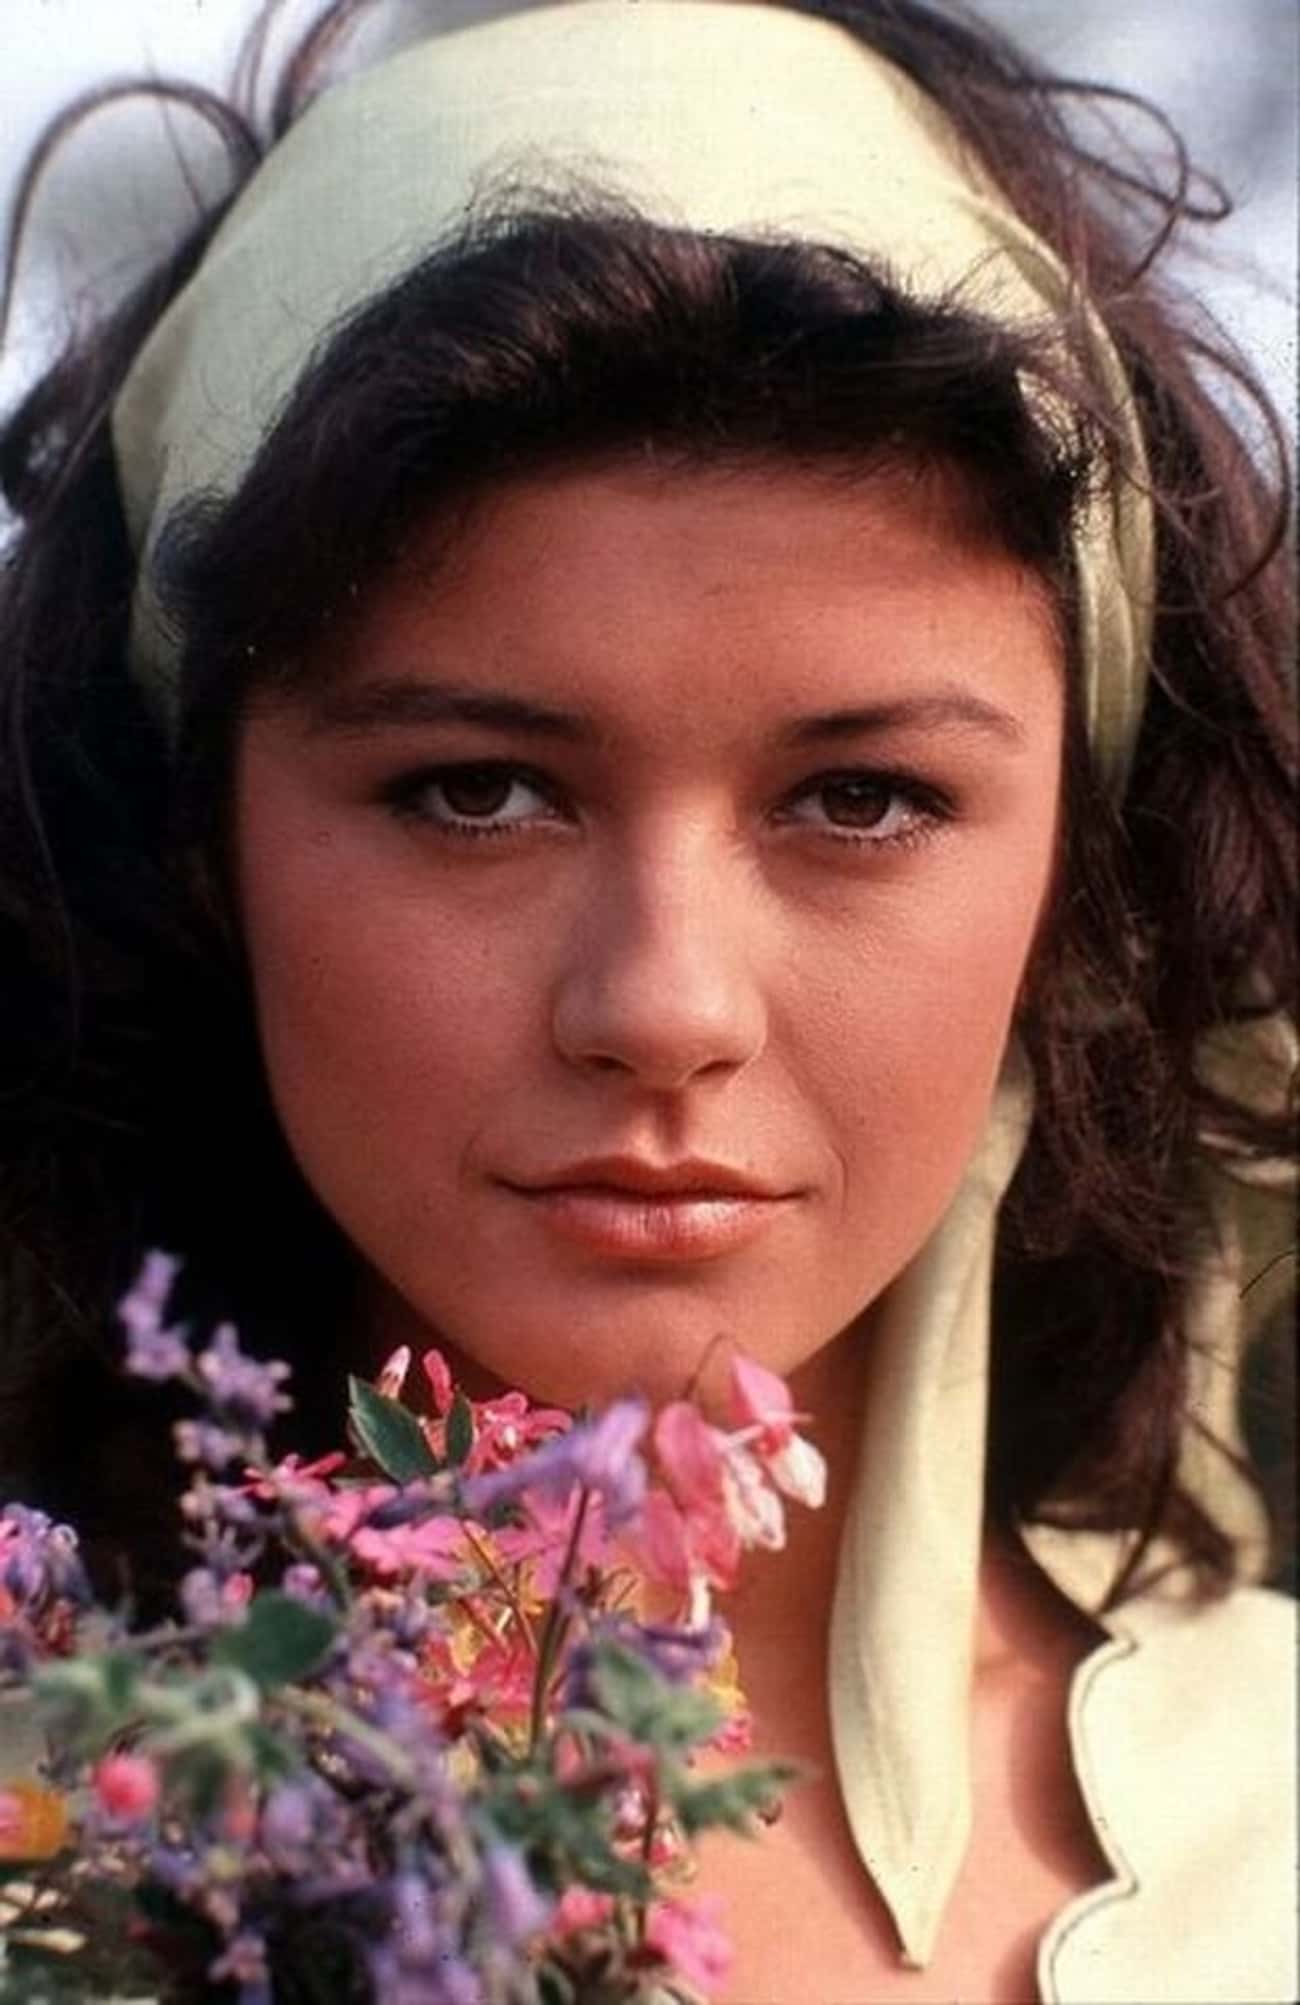 Young Catherine Zeta-Jones in White Blouse Holding Flowers